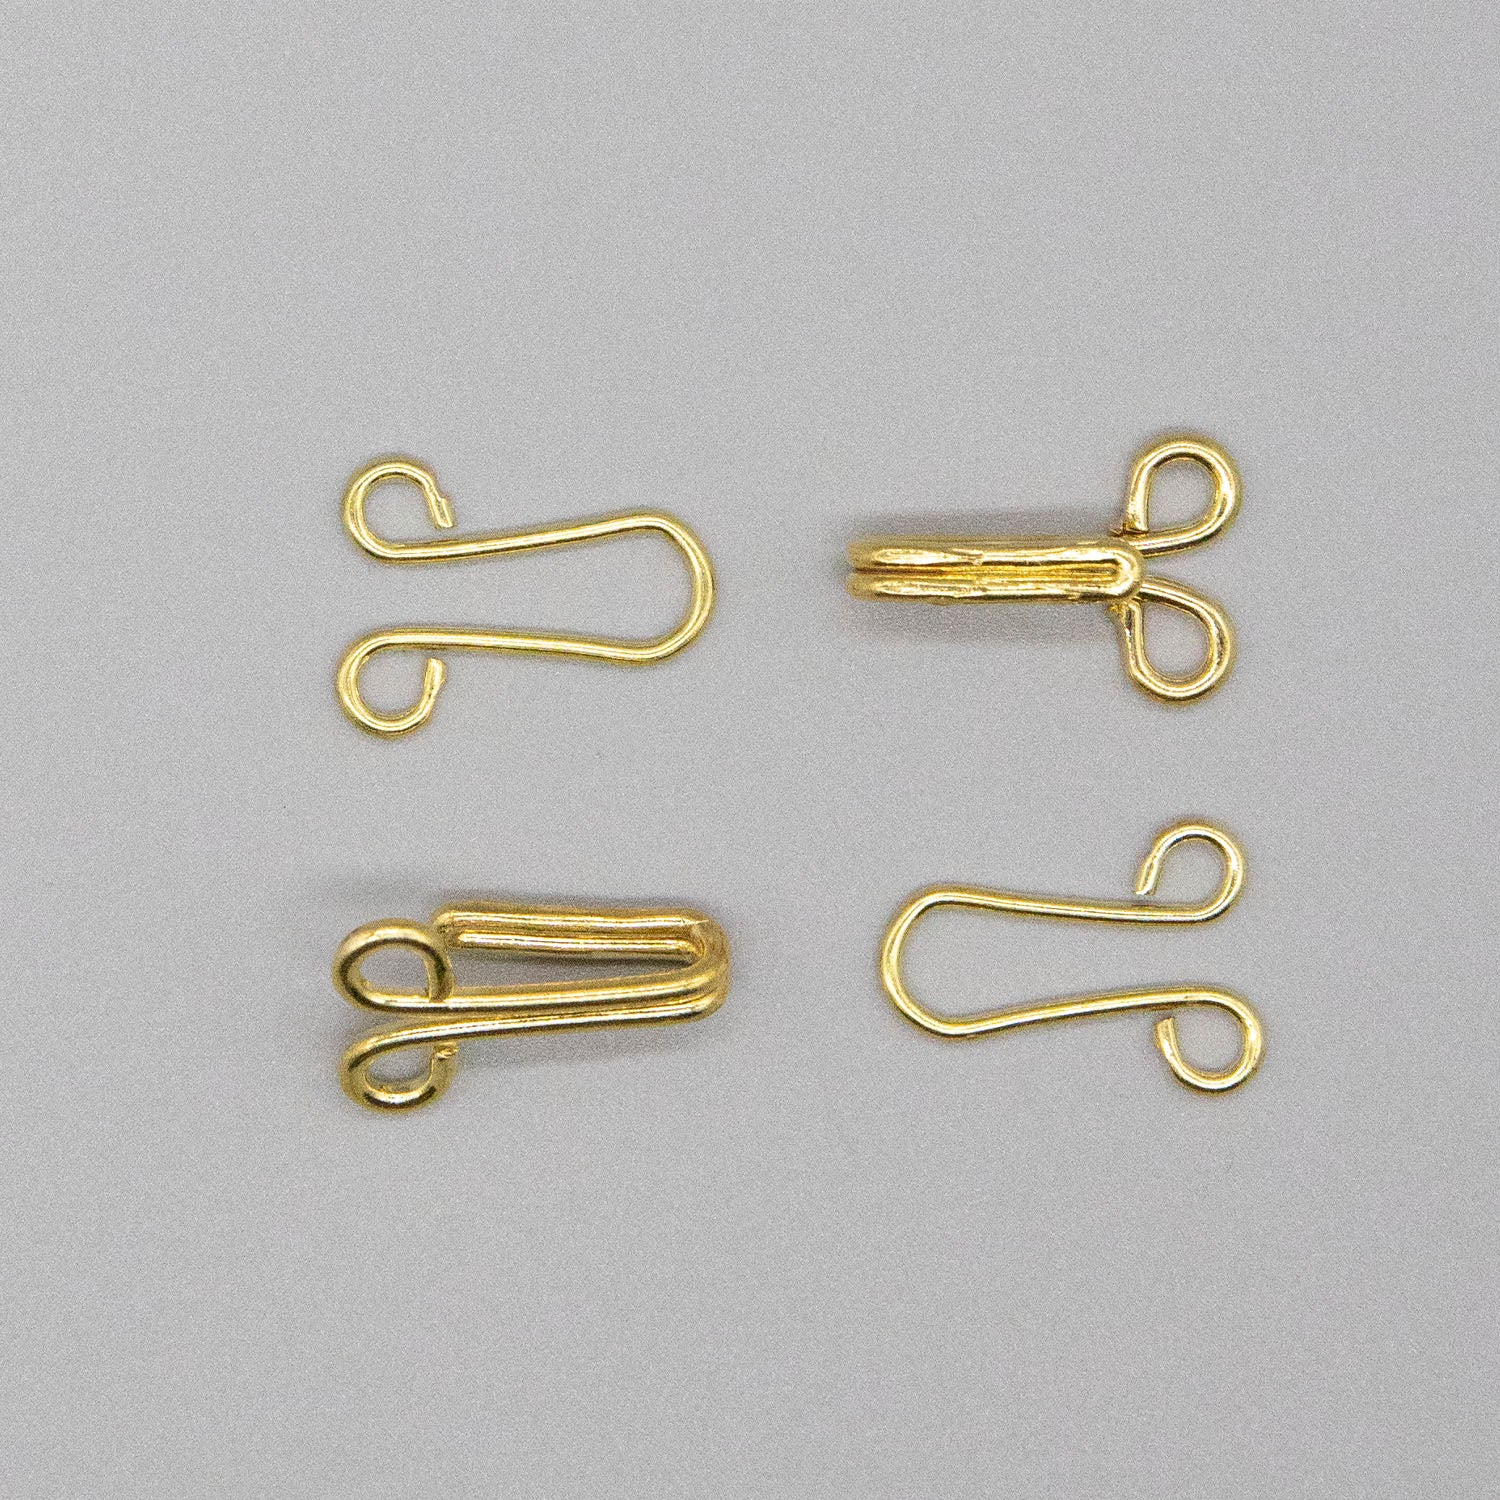 Hooks and eyes: A story of medieval fasteners